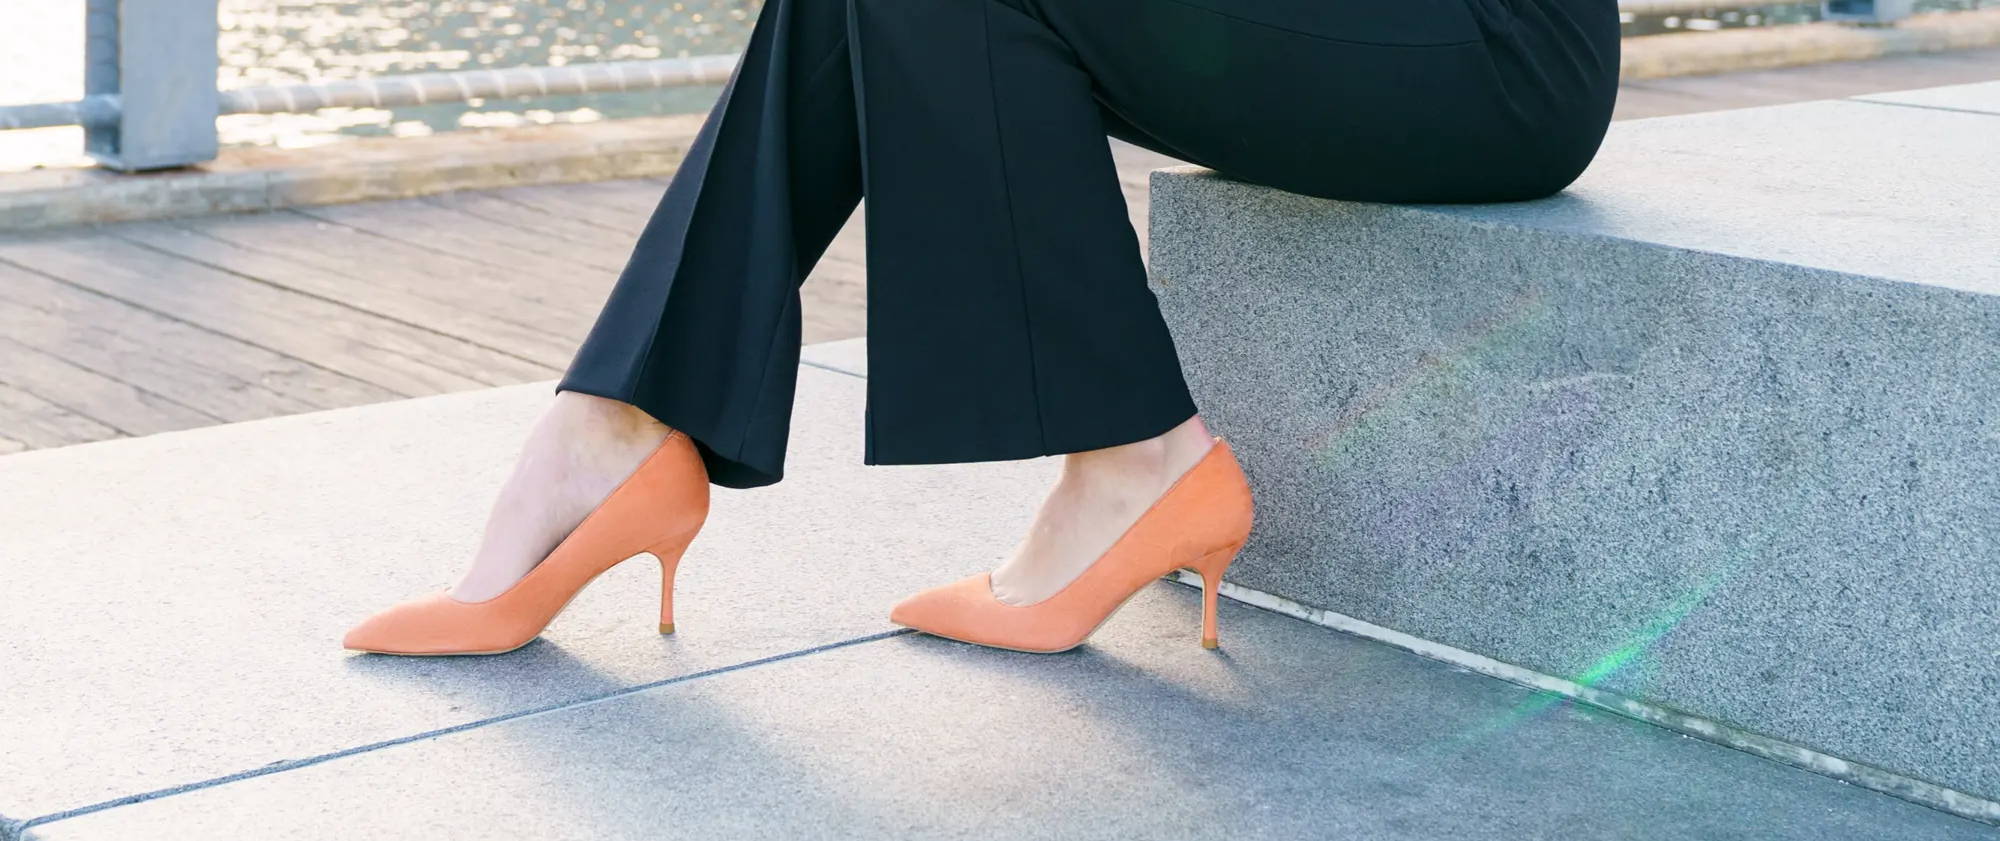 Comfortable Peach Heels | Ally Shoes